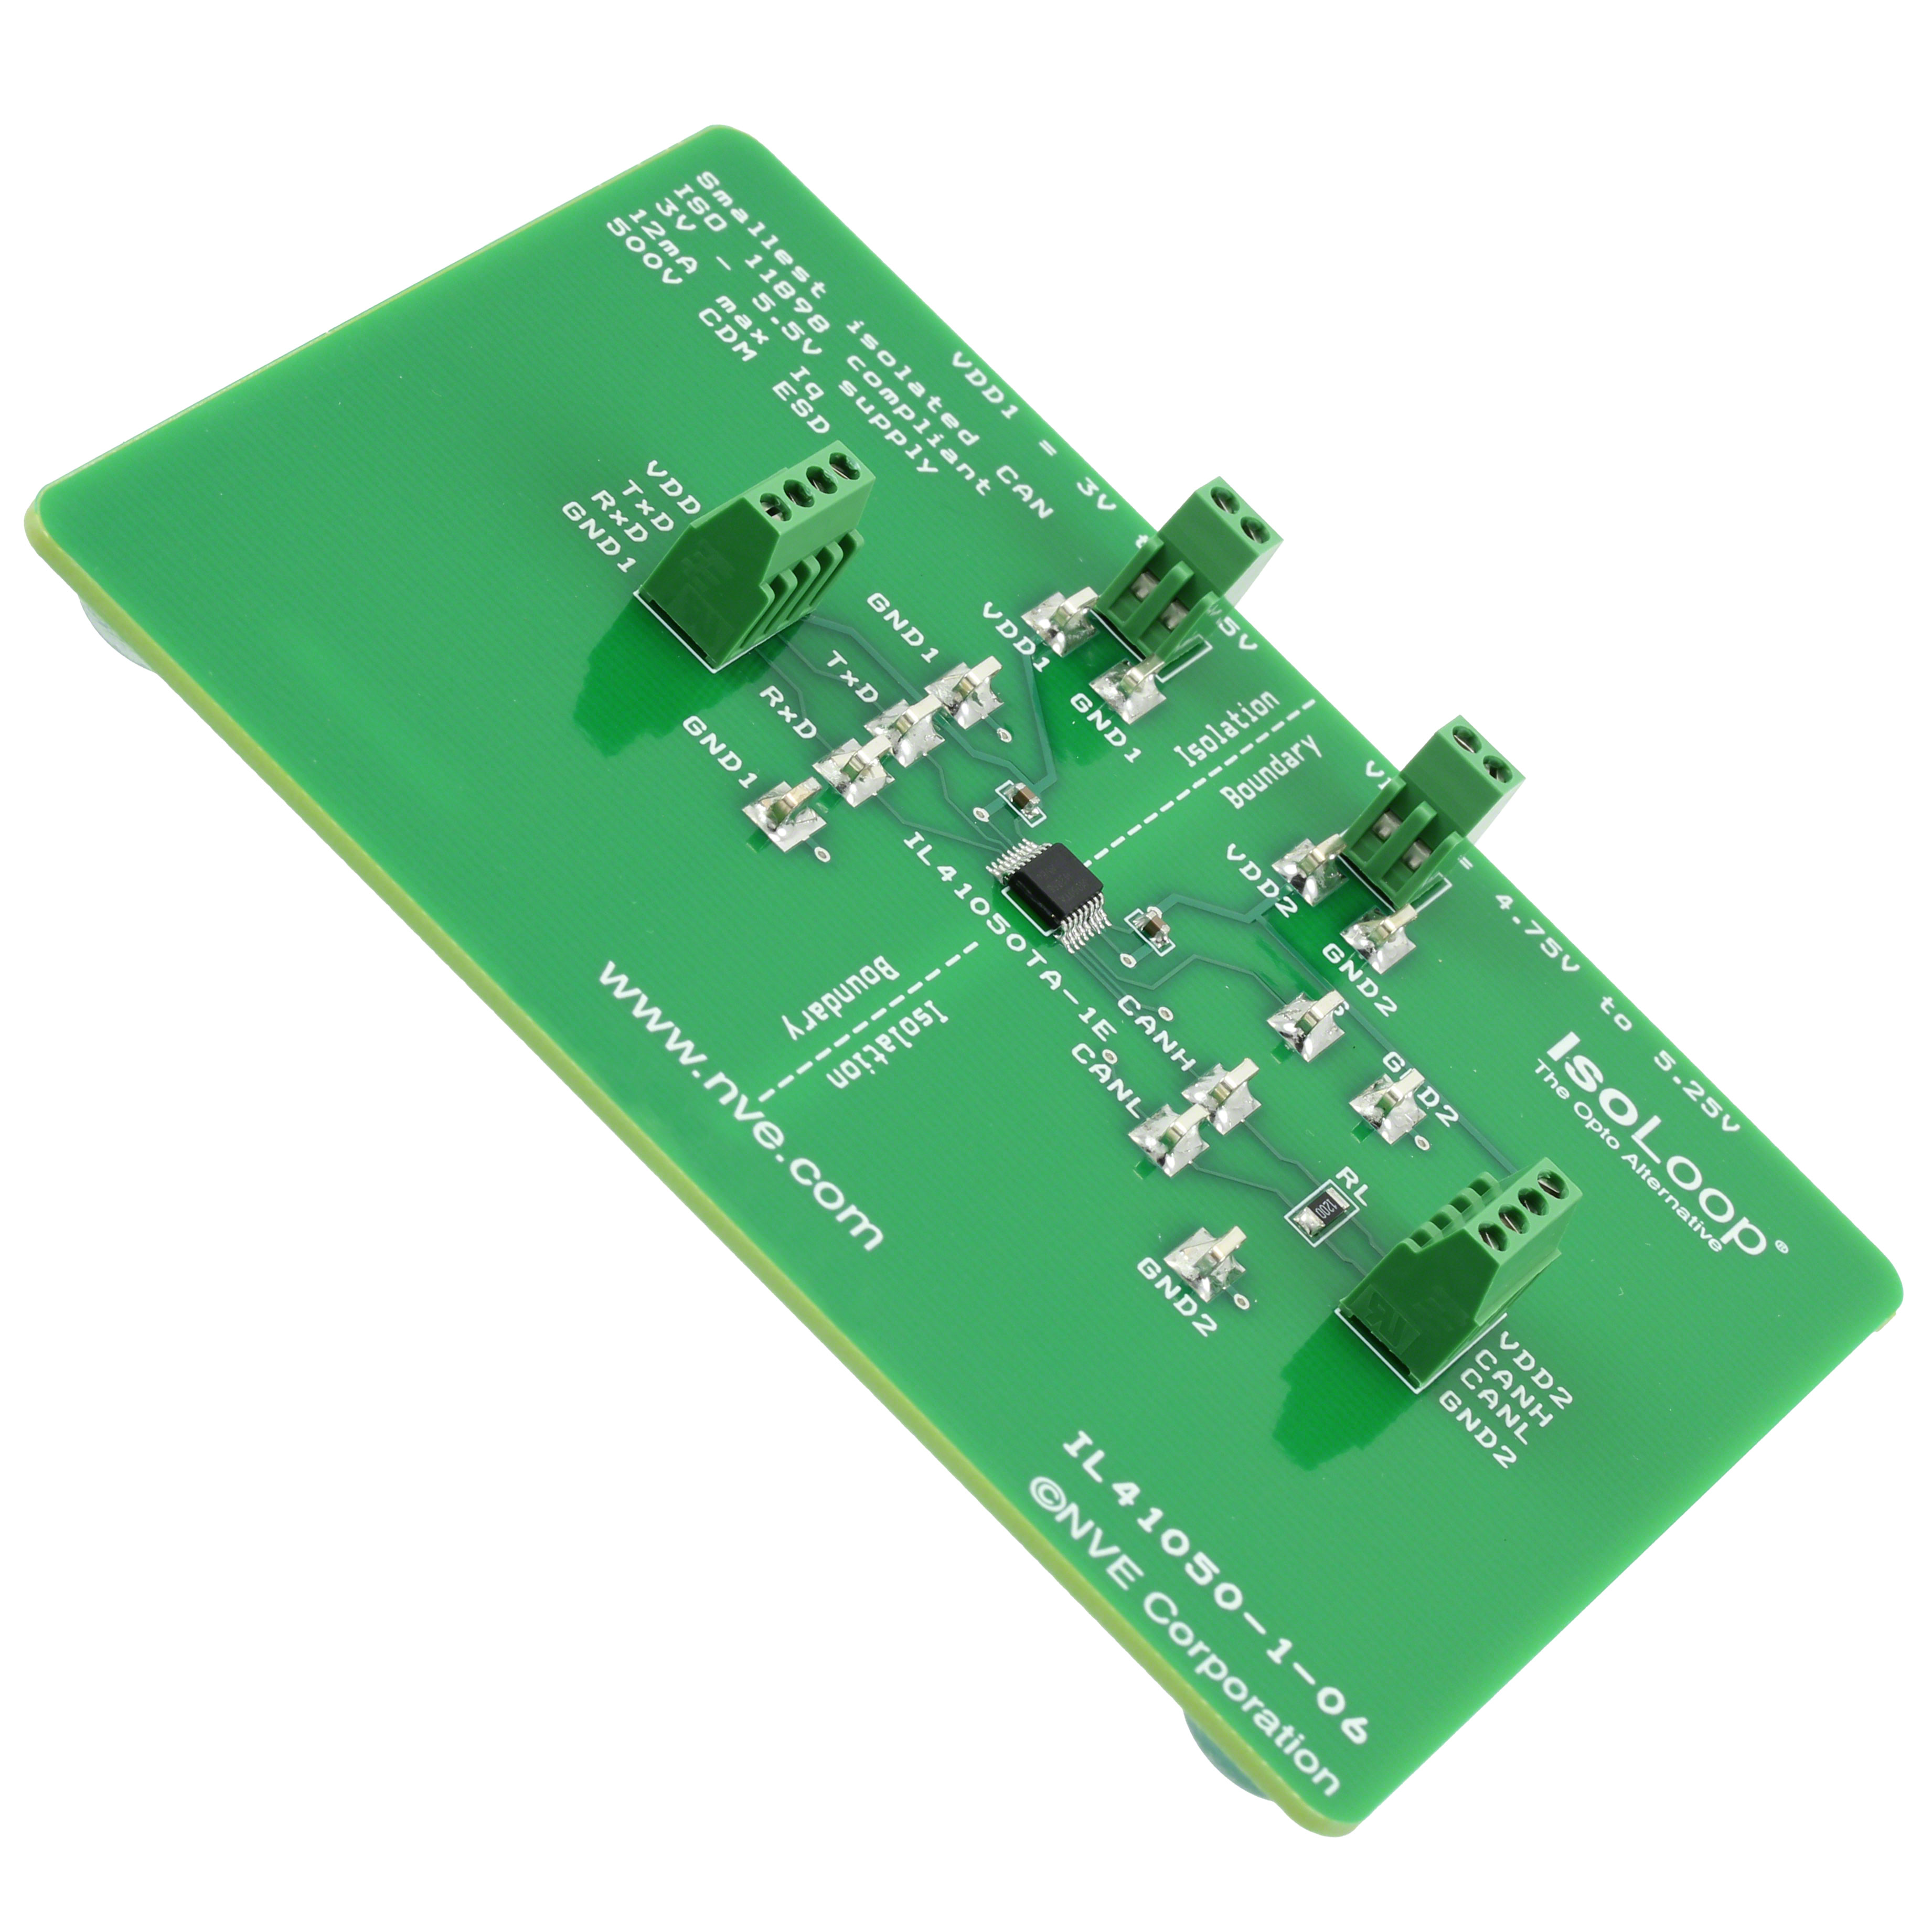 【IL 41050-1-01】ISOLATED CAN TRANSCEIVER 16SOIC